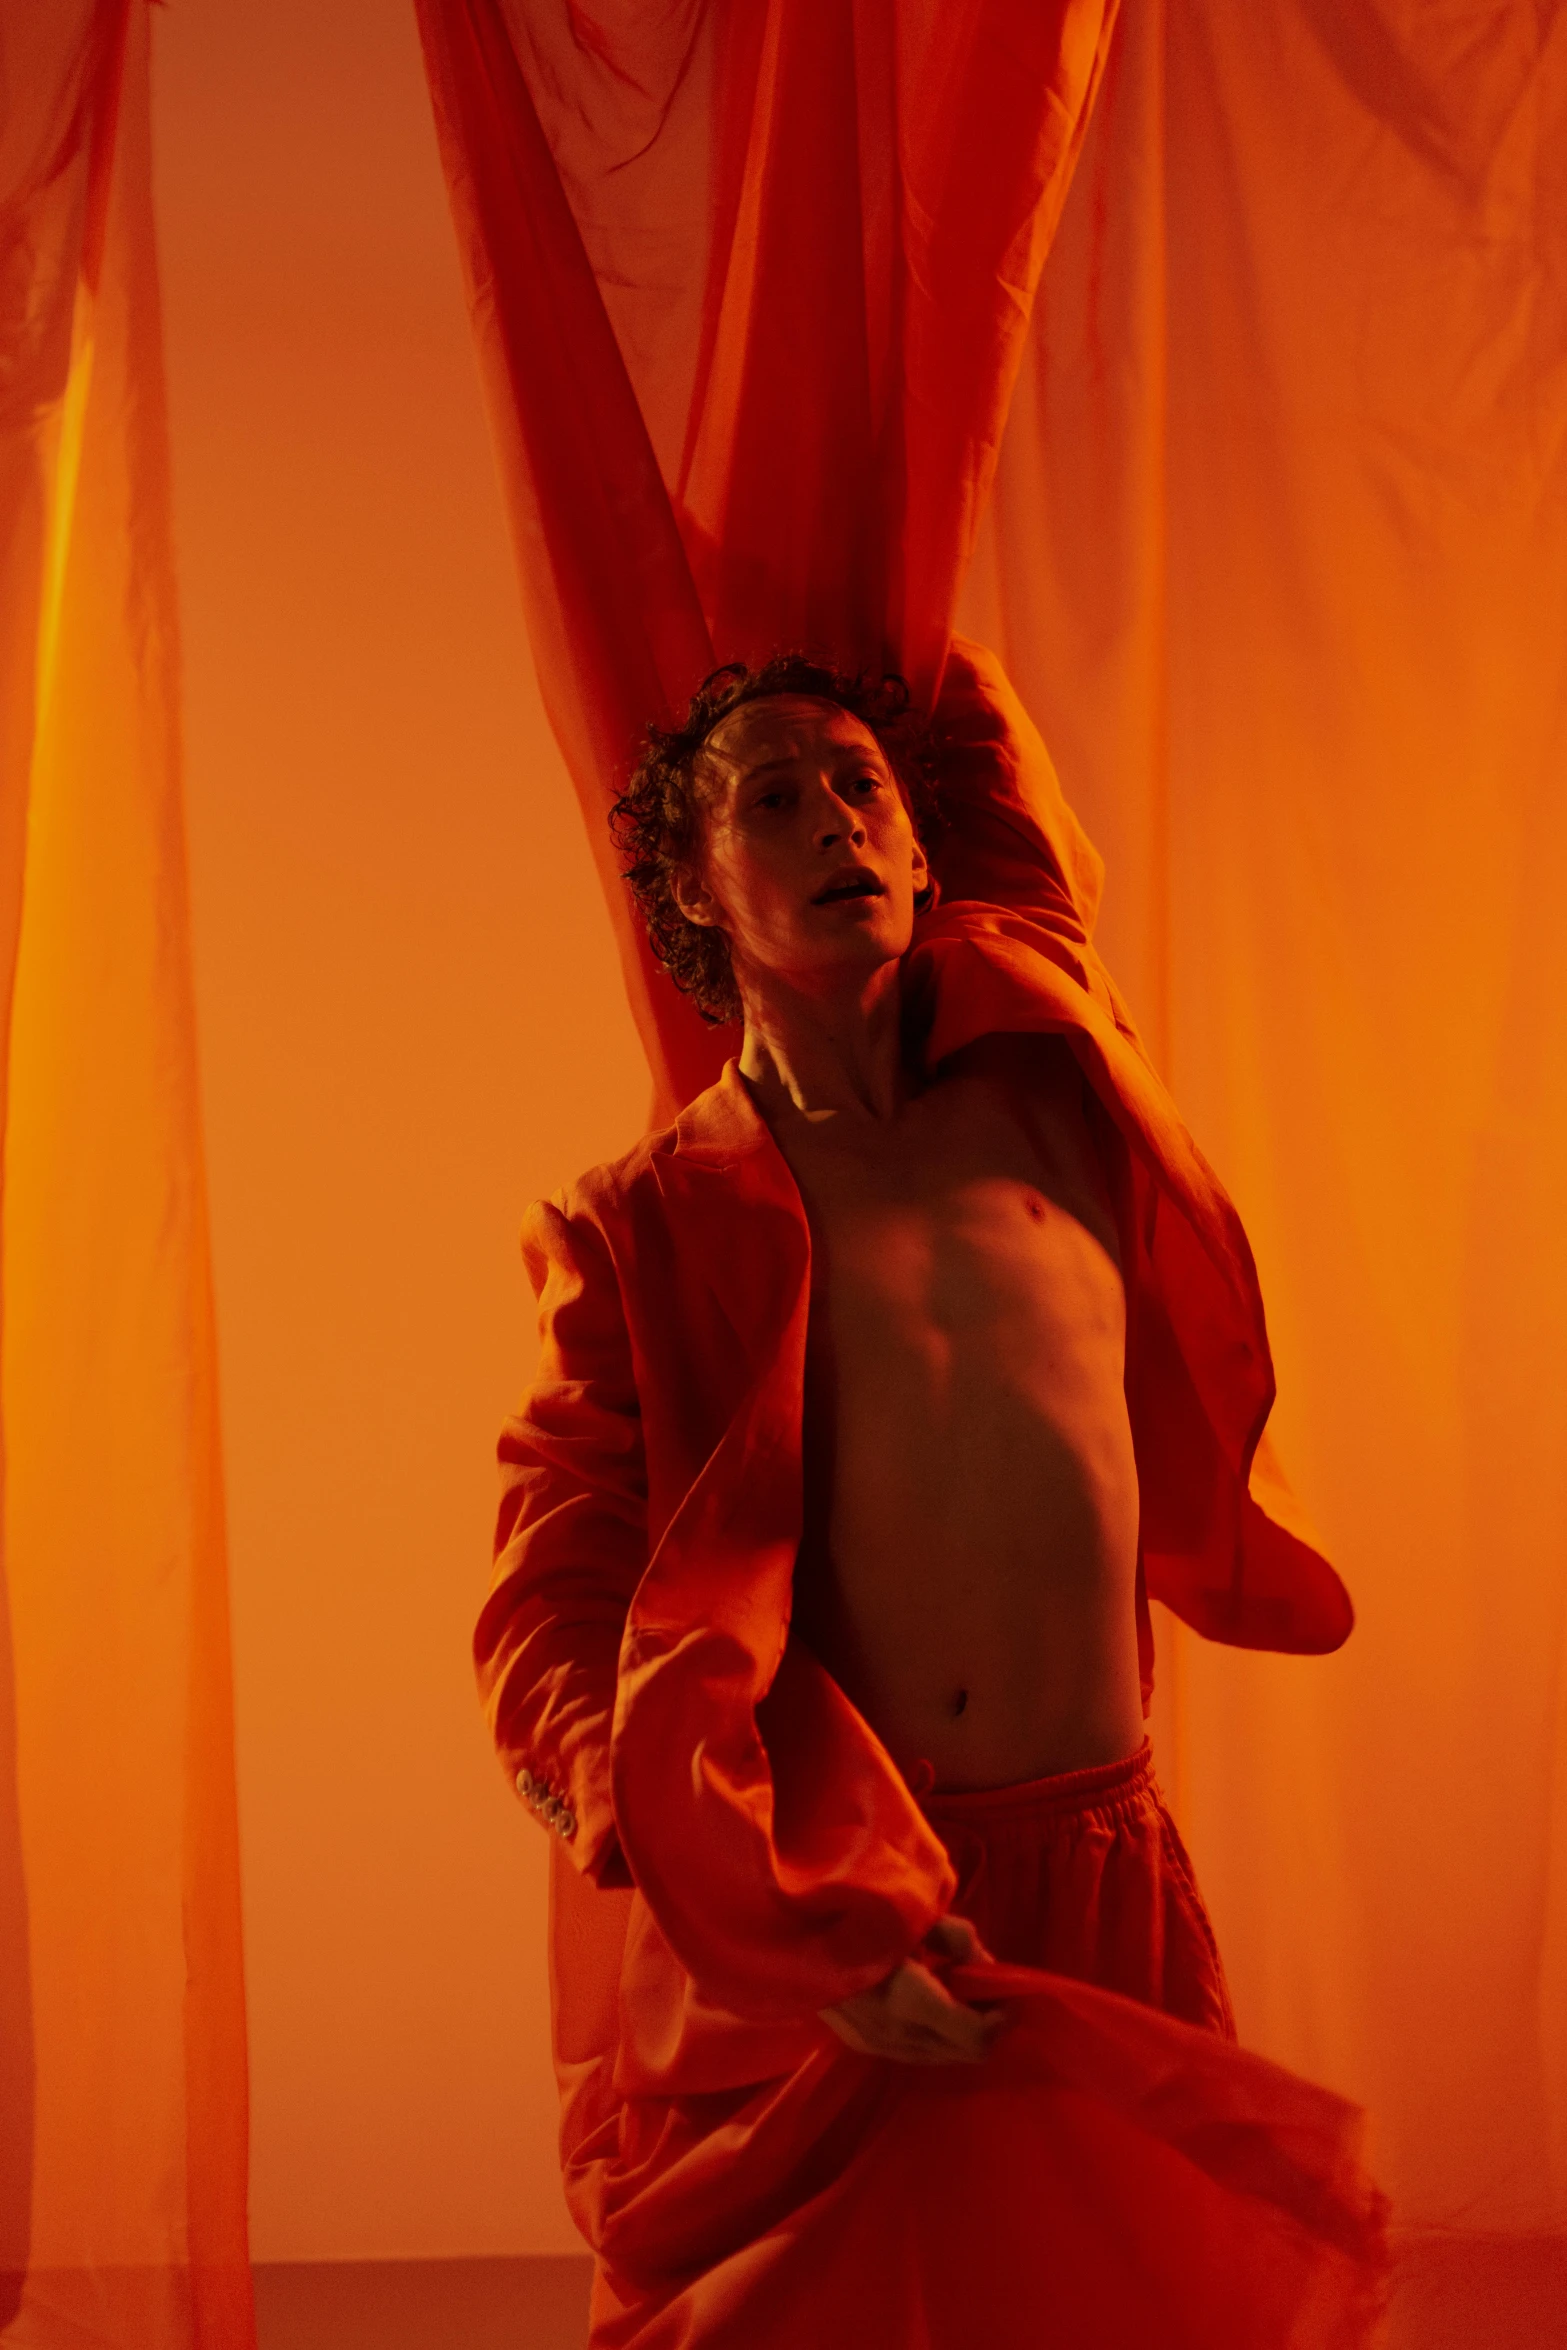 a man in a red tutu poses underneath curtains